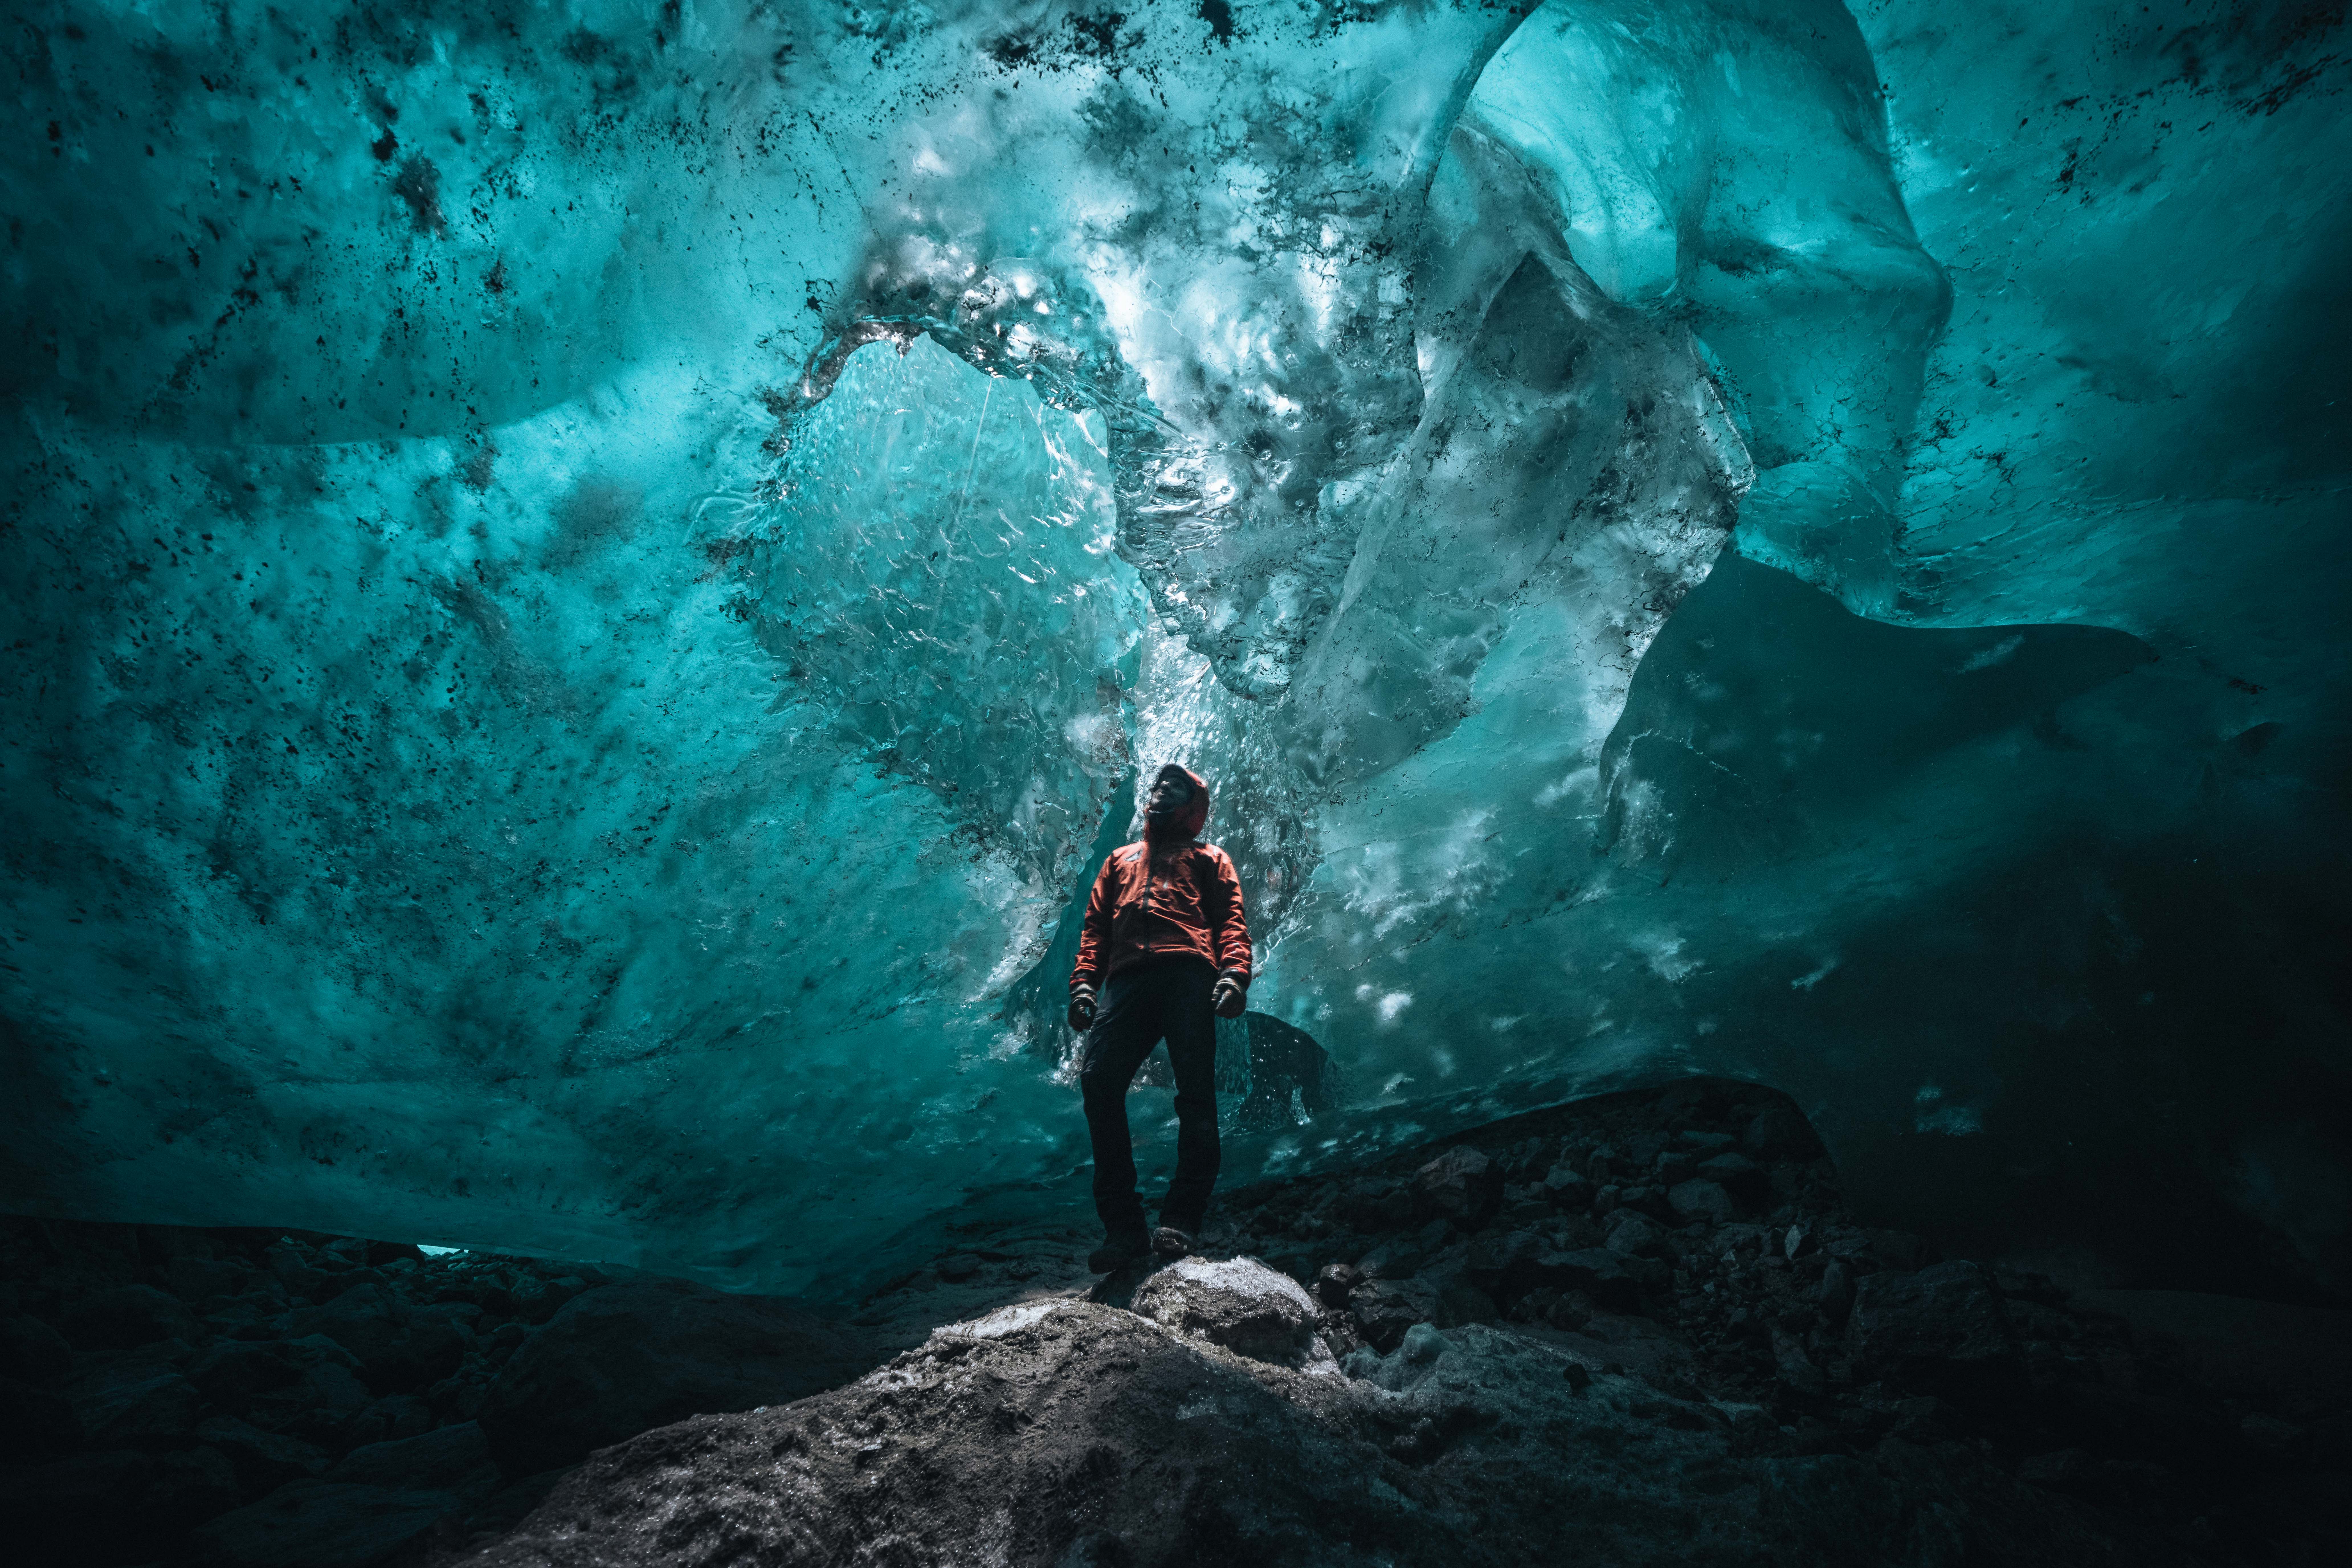 View in the ice cave in East Greenland. Photo by Nunatak Adventures